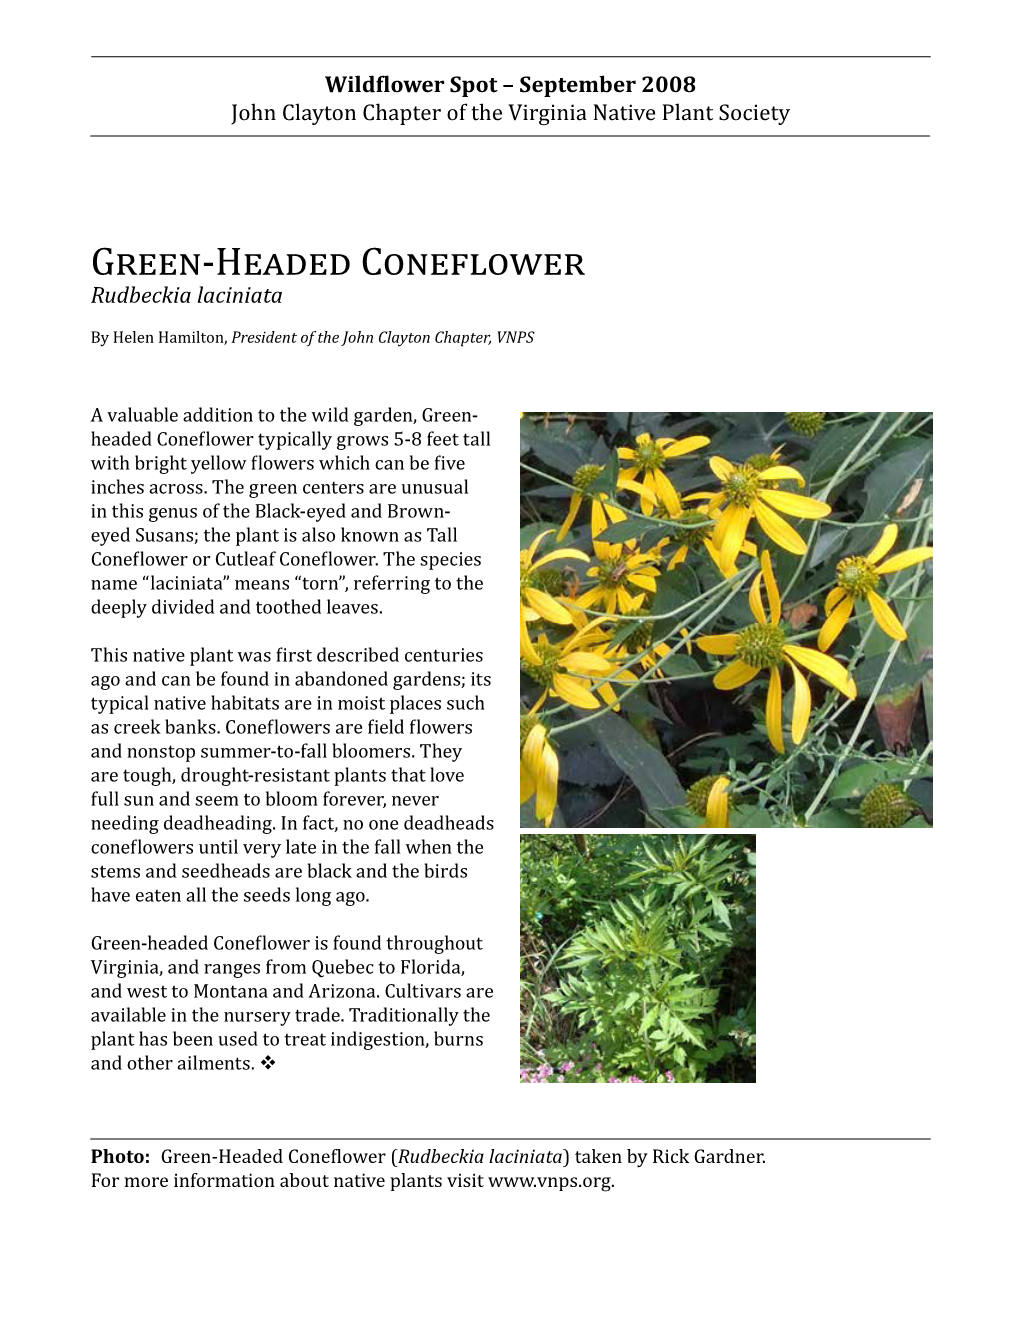 Green-Headed Coneflower Is Found Throughout Virginia, and Ranges from Quebec to Florida, and West to Montana and Arizona